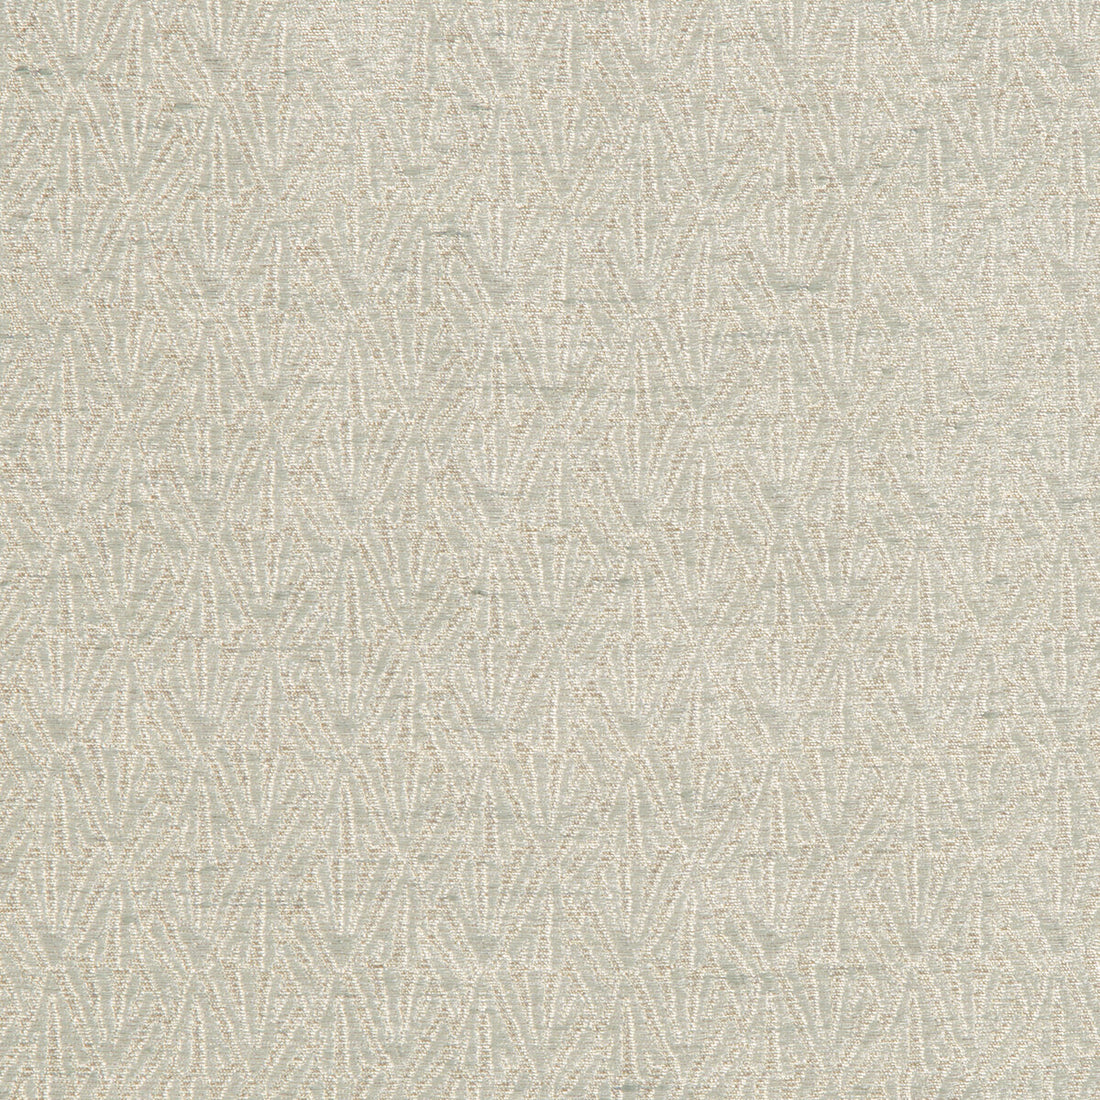 Celsian fabric in patina color - pattern 4229.1511.0 - by Kravet Couture in the Calvin Klein Home collection